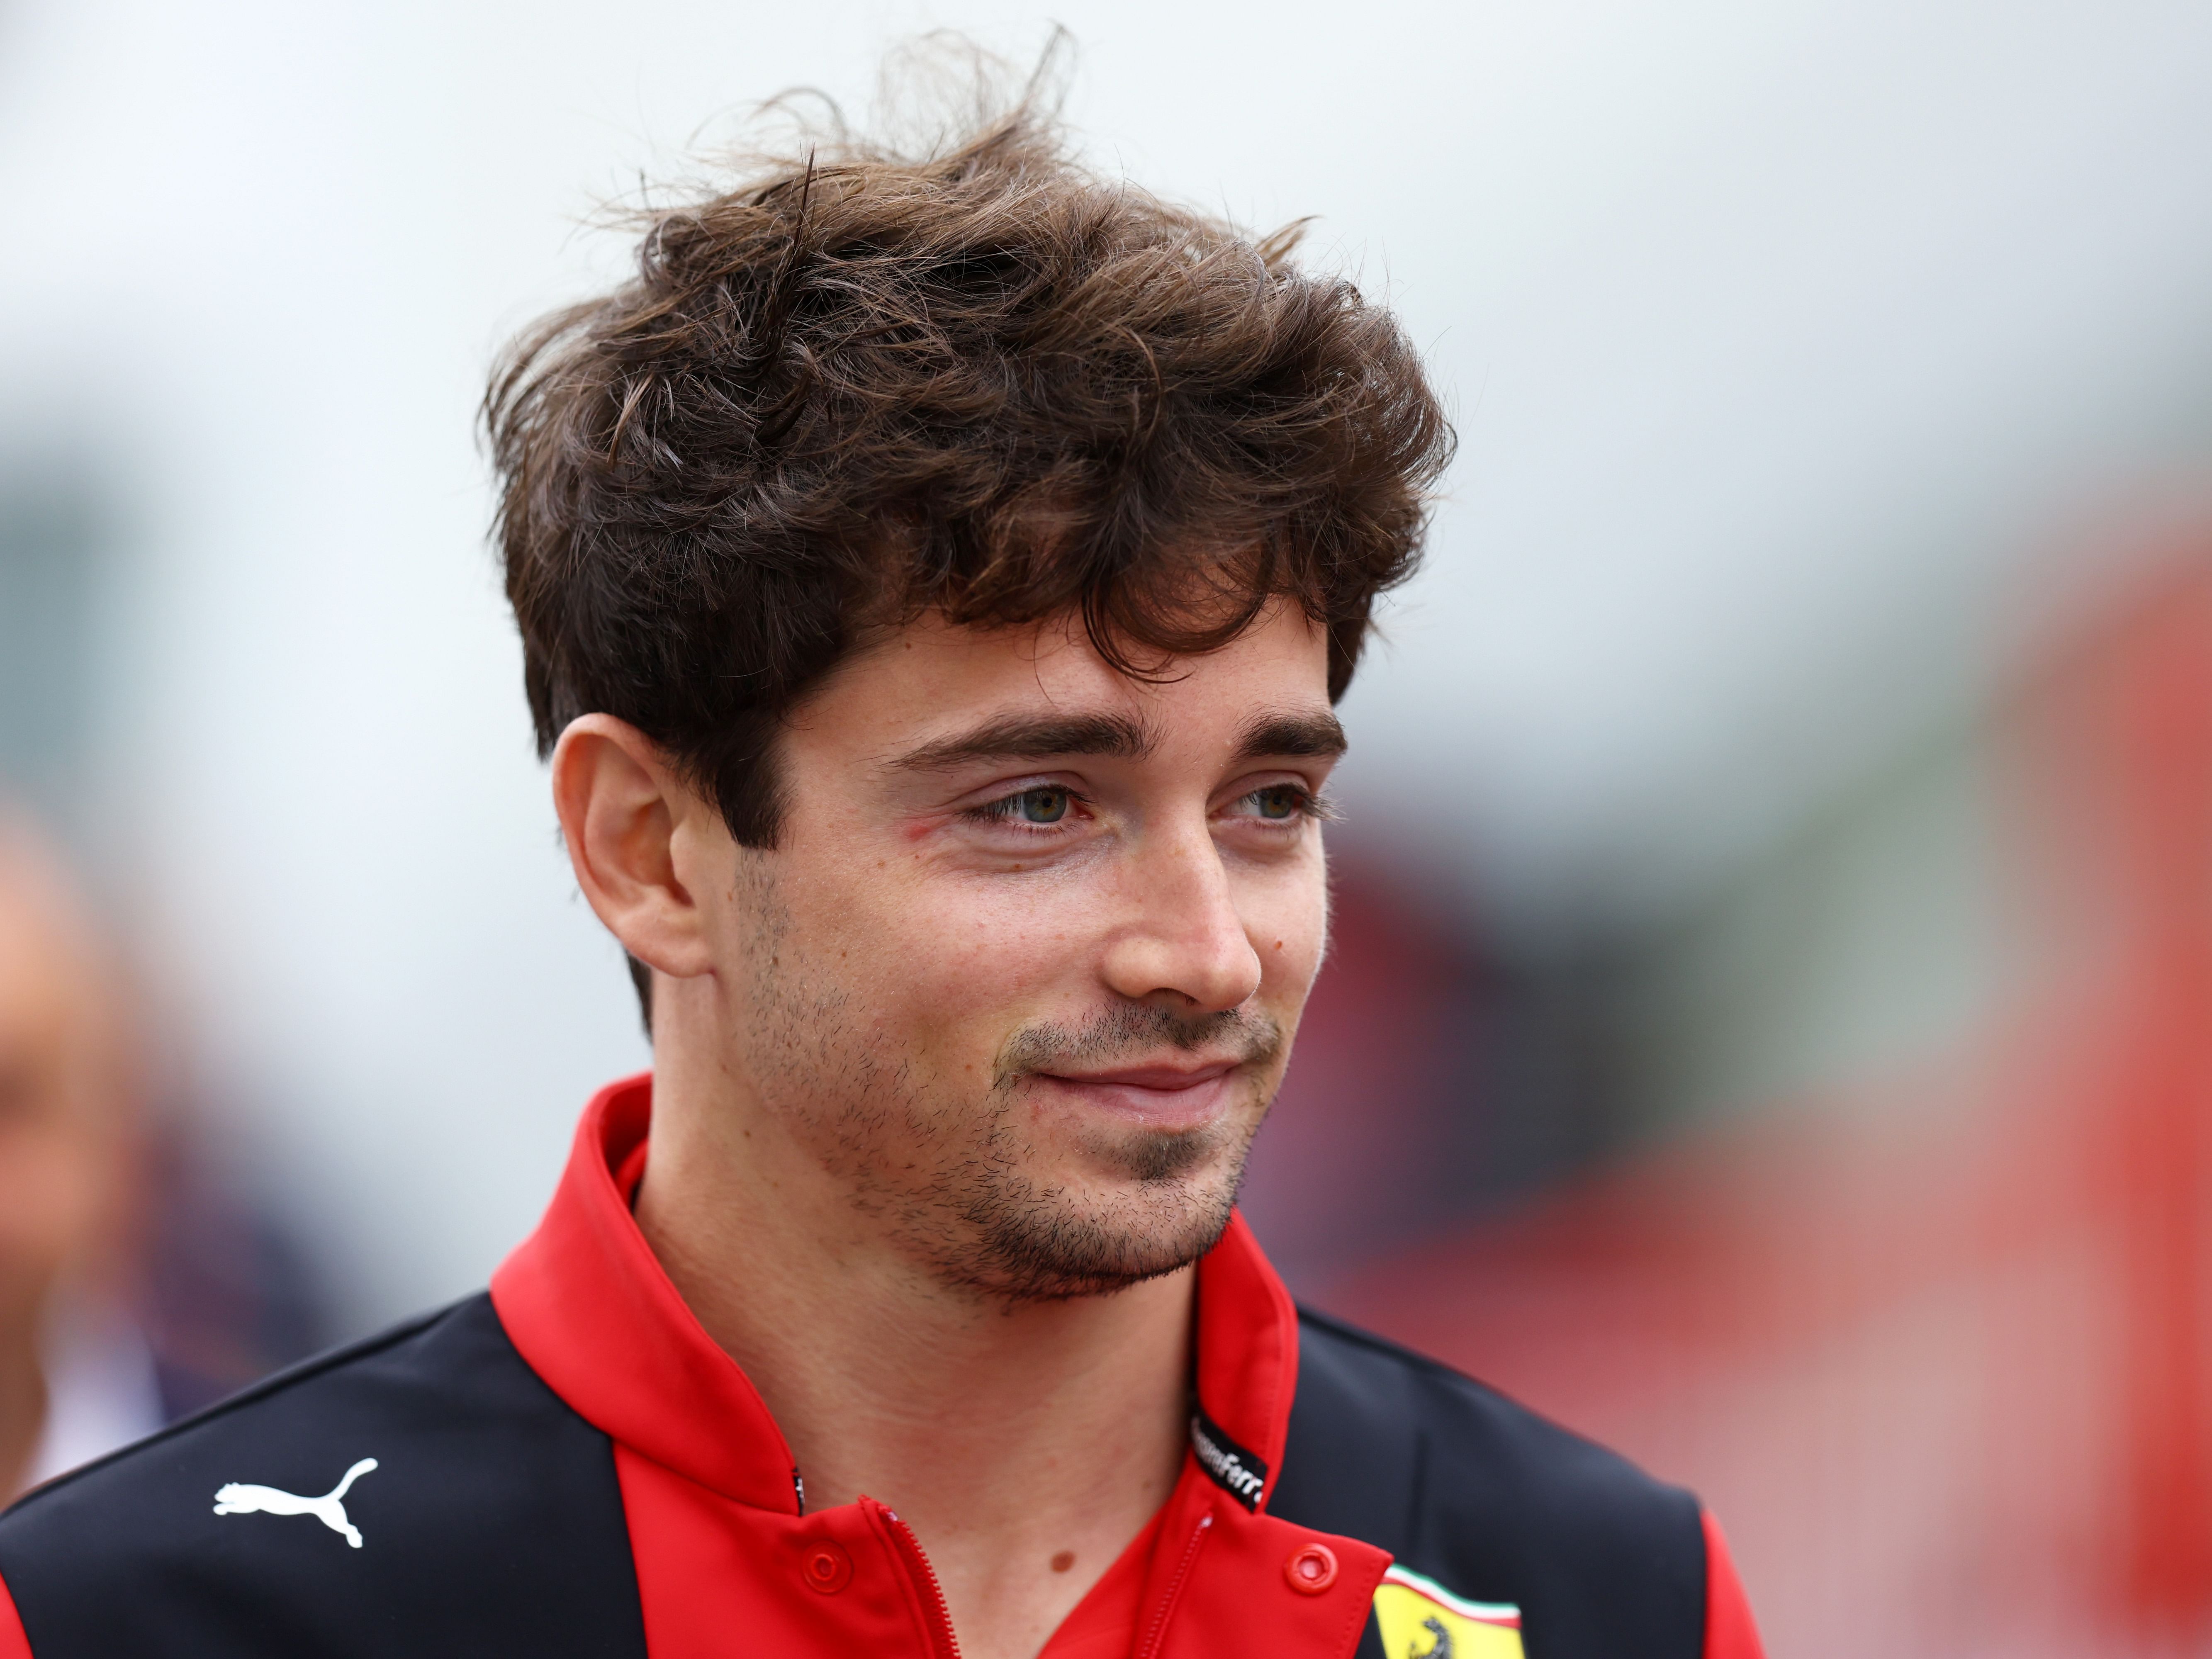 Charles Leclerc looks on in the paddock prior to practice ahead of the 2023 F1 Azerbaijan Grand Prix. (Photo by Francois Nel/Getty Images)